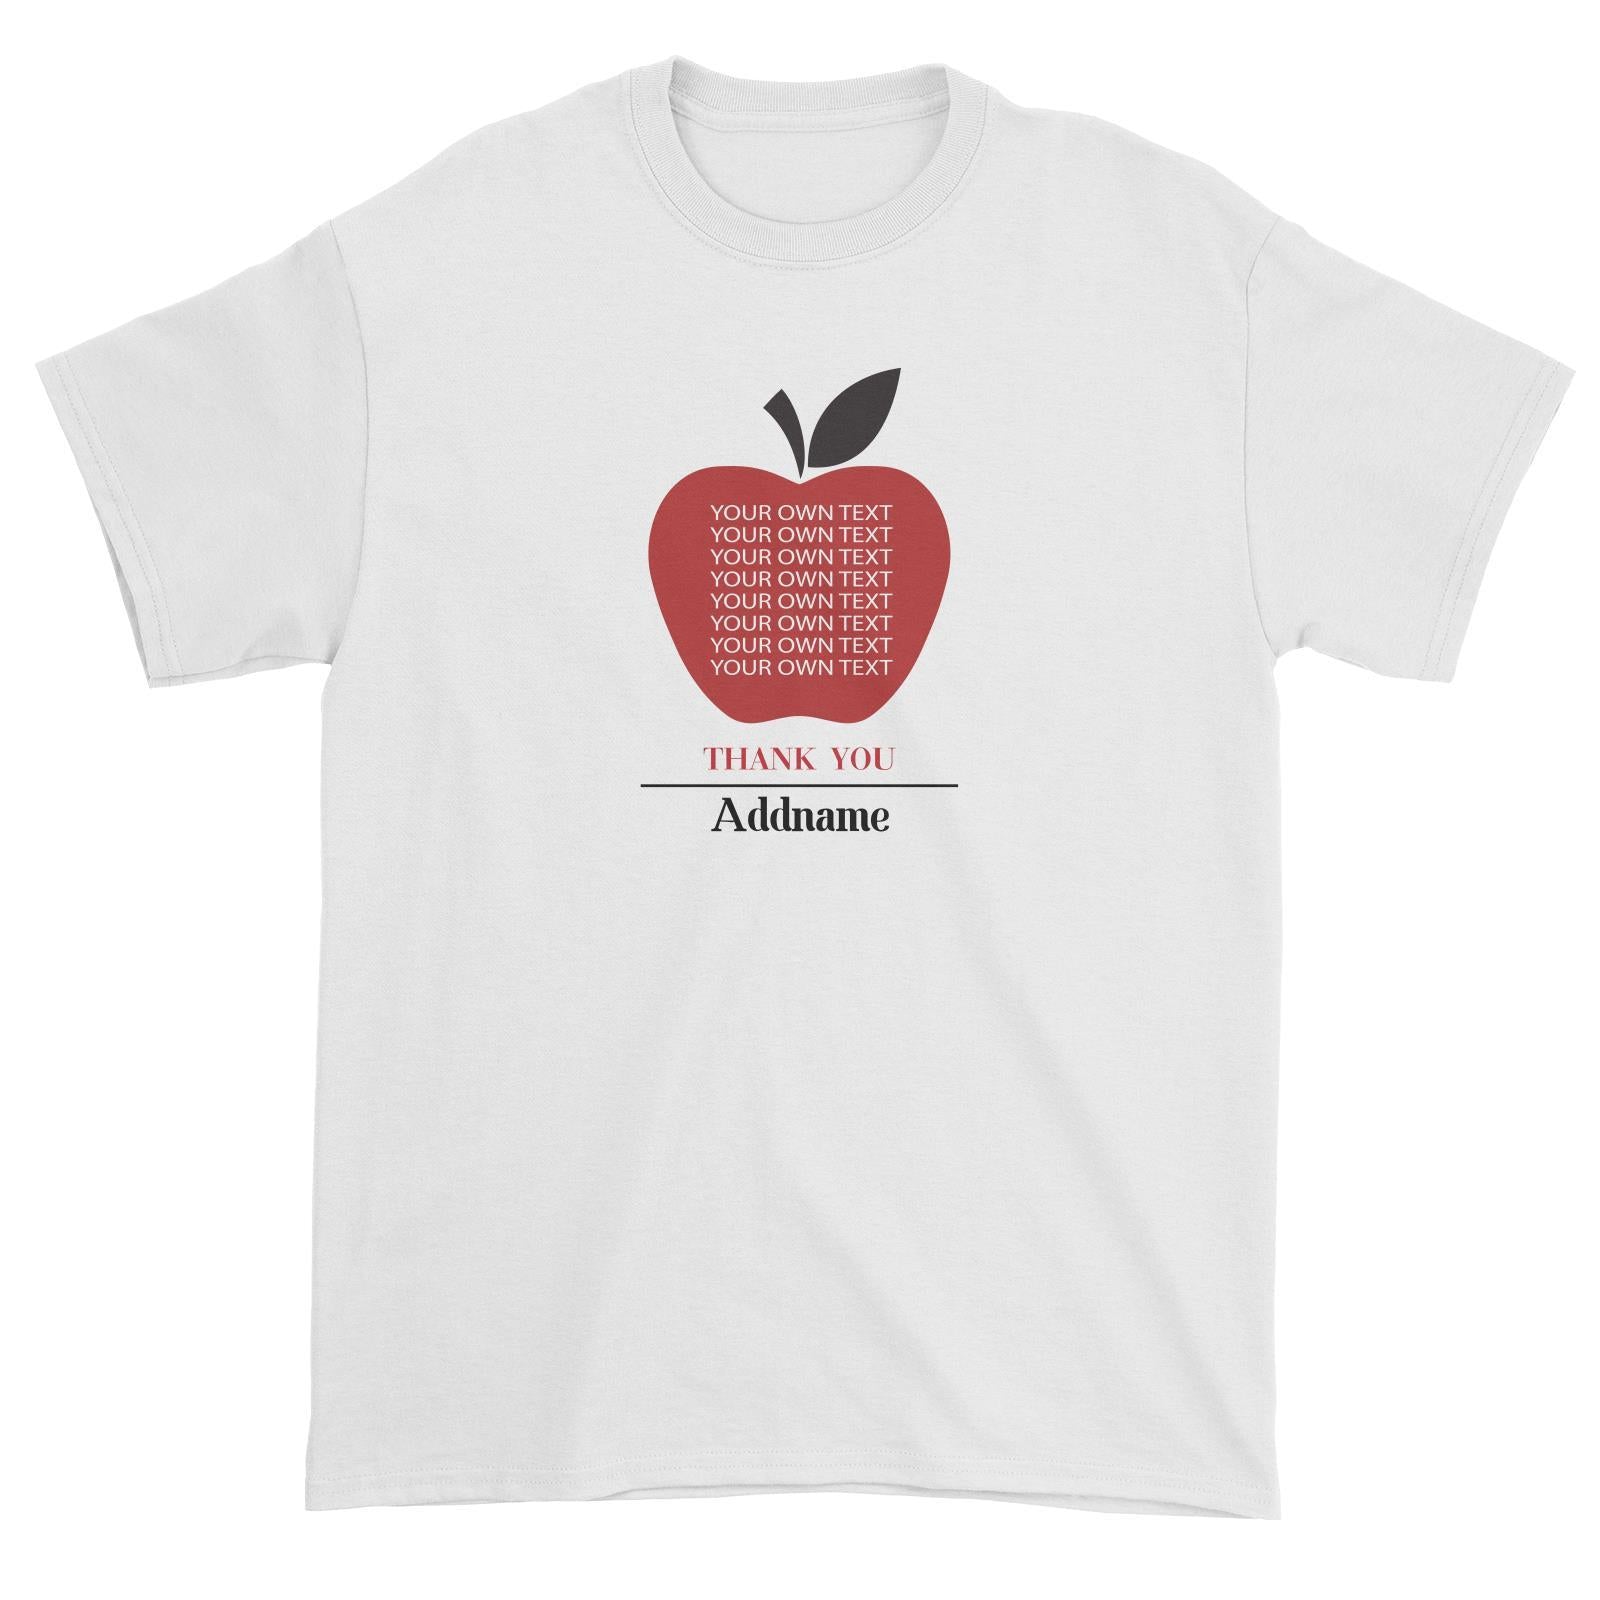 Teacher Addname Big Red Apple Thank You Addname & Add Text Unisex T-Shirt